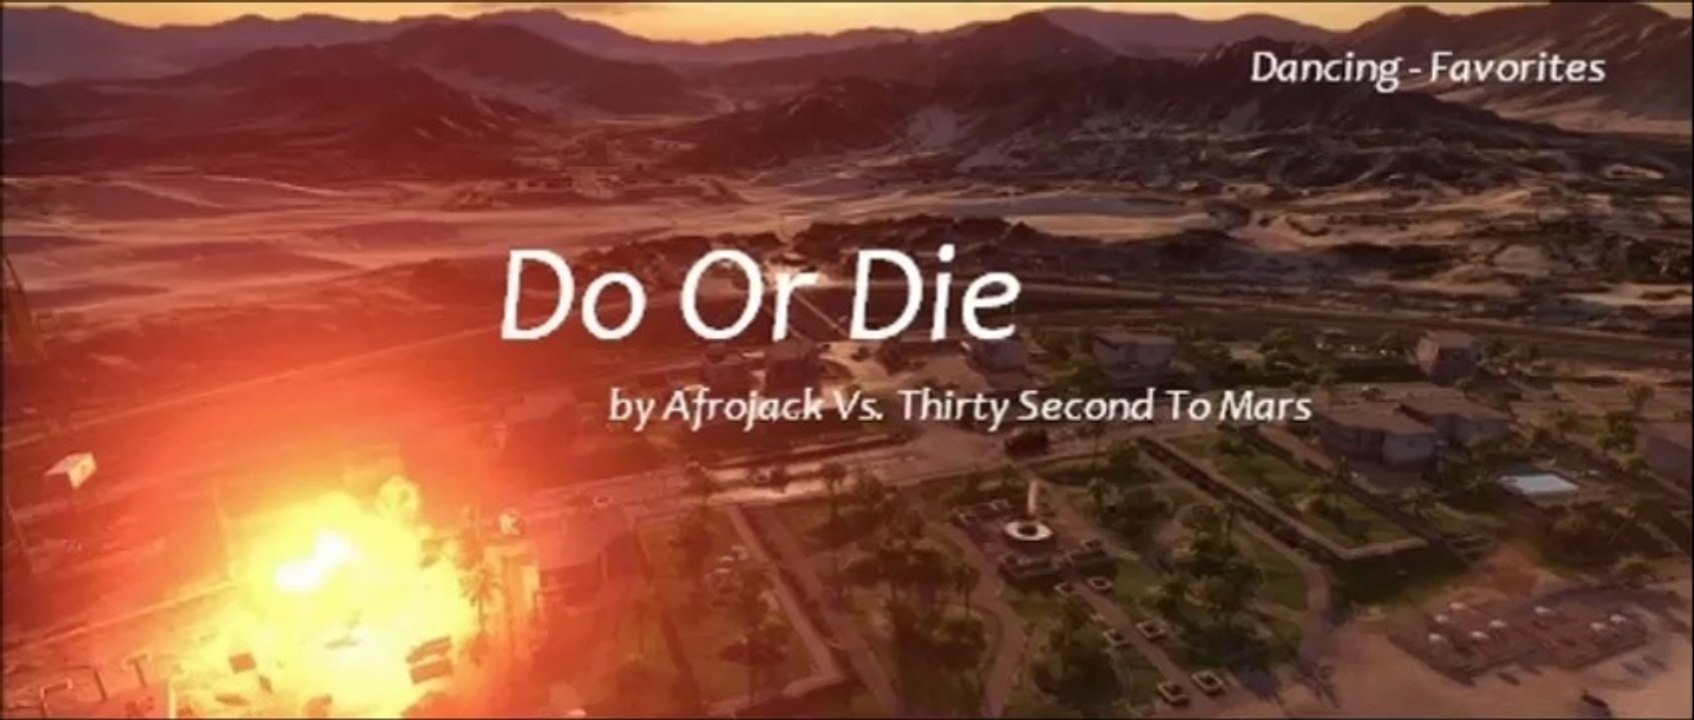 Do Or Die by Afrojack Vs. Thirty Seconds To Mars (Dancing - Favorites)